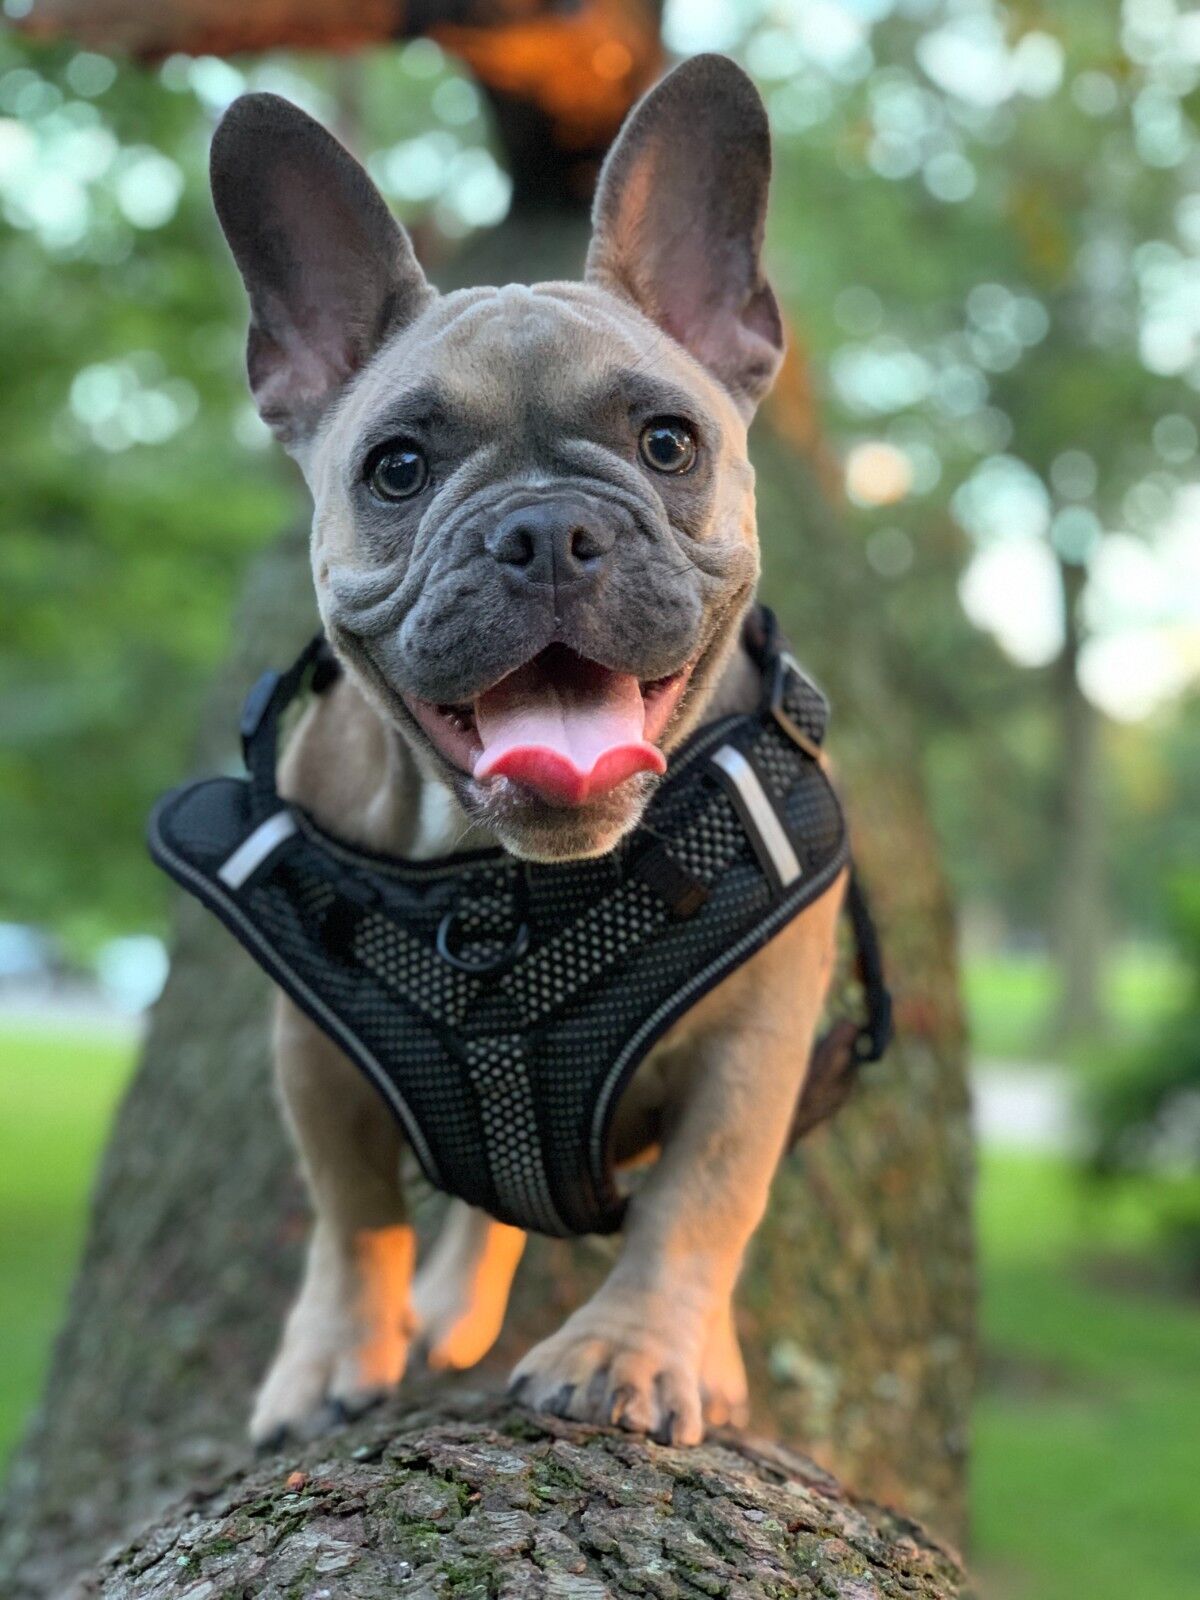 What age should a dog wear a harness?